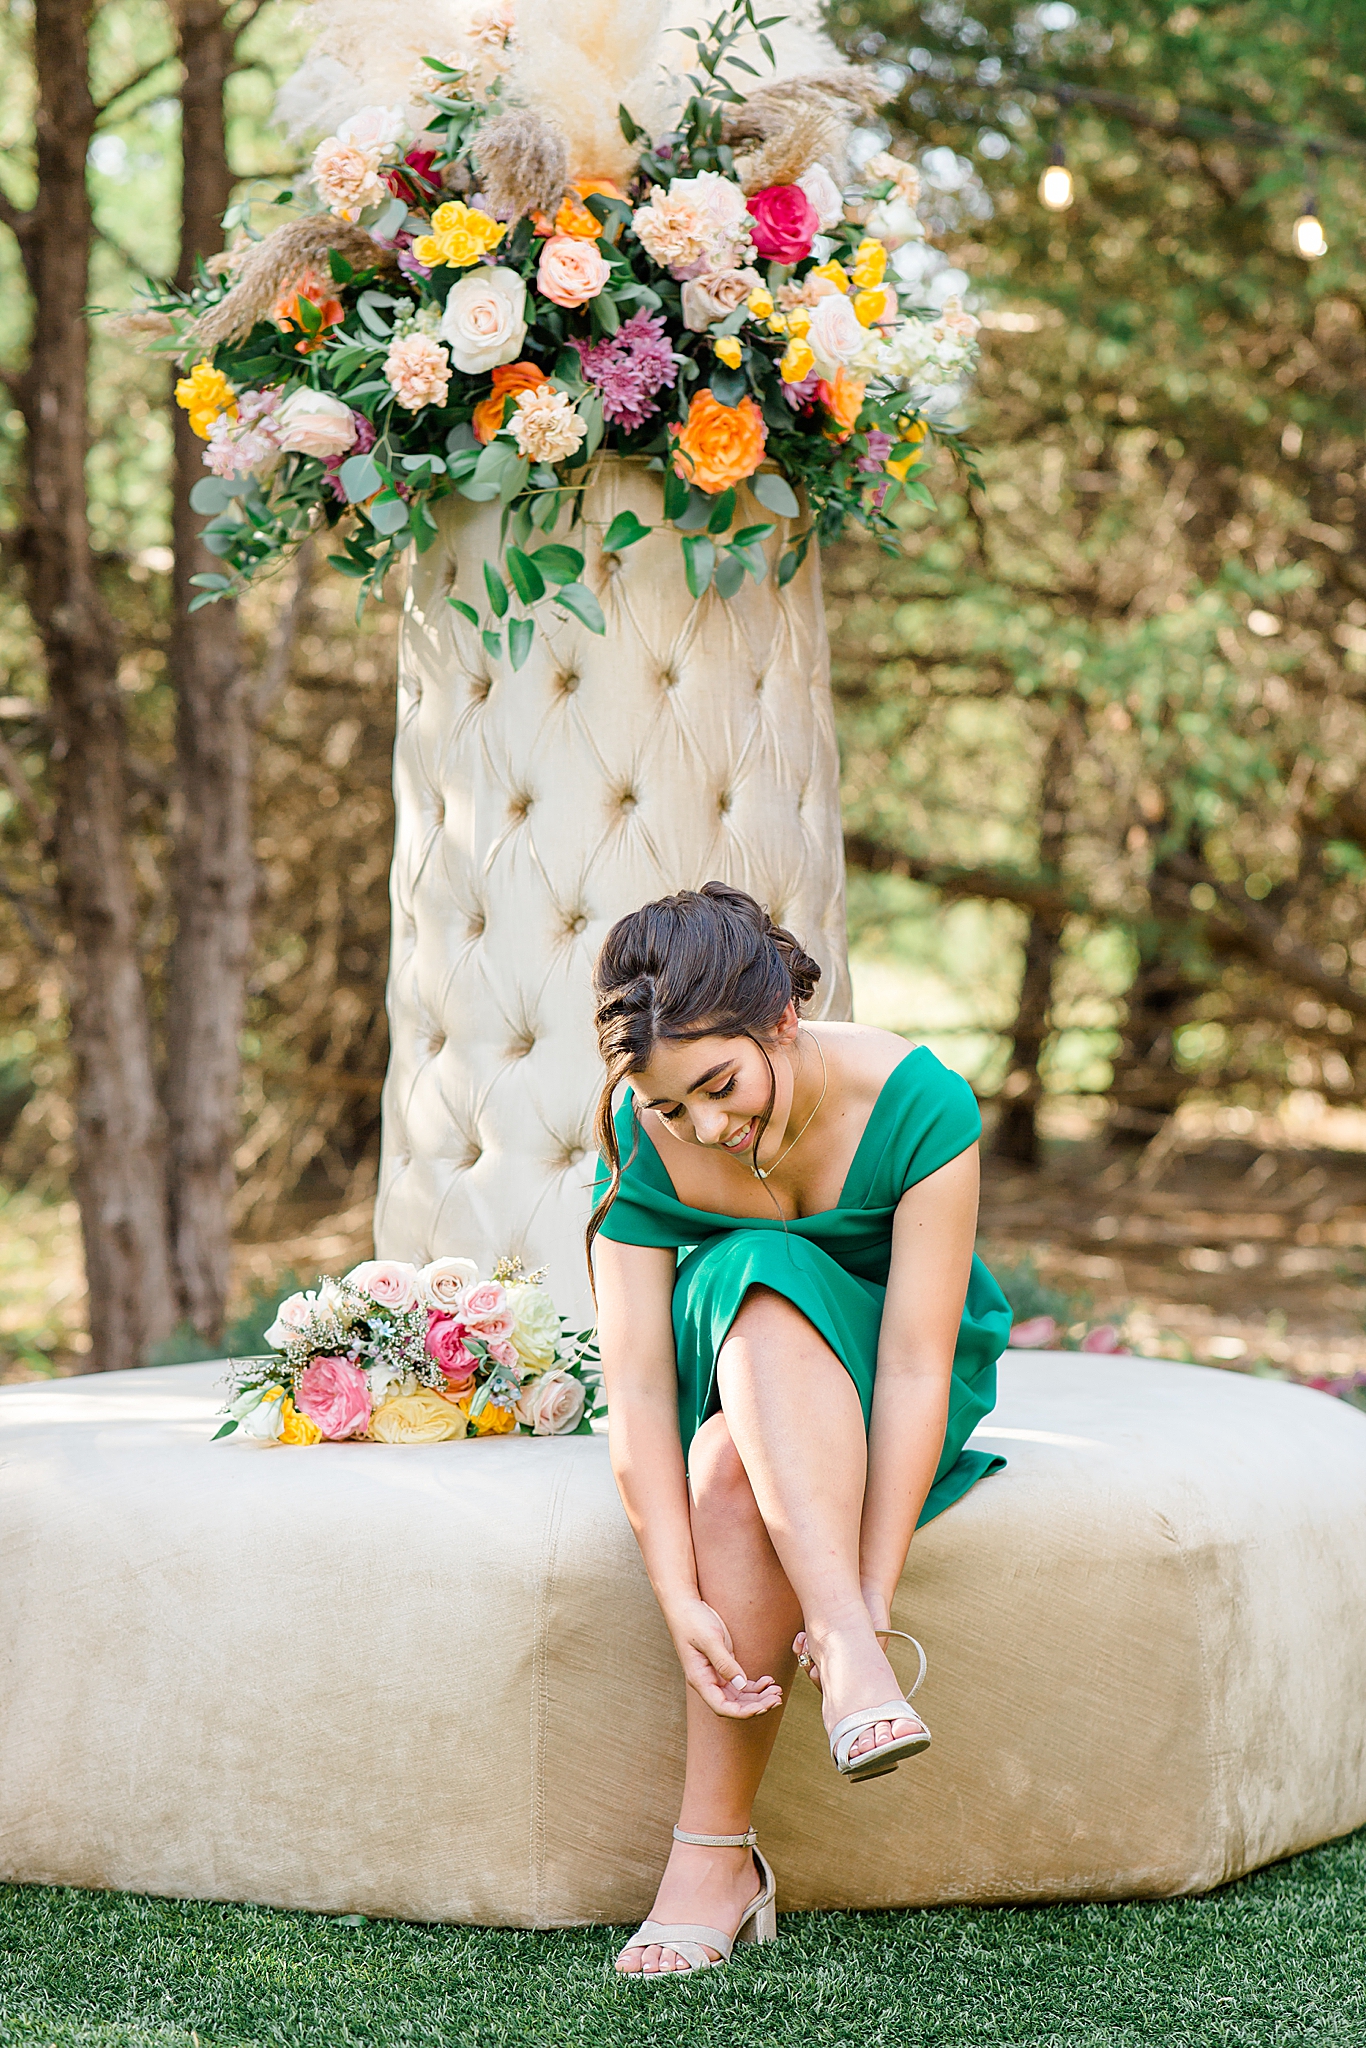 jr. bridesmaid in green gown adjusts shoes